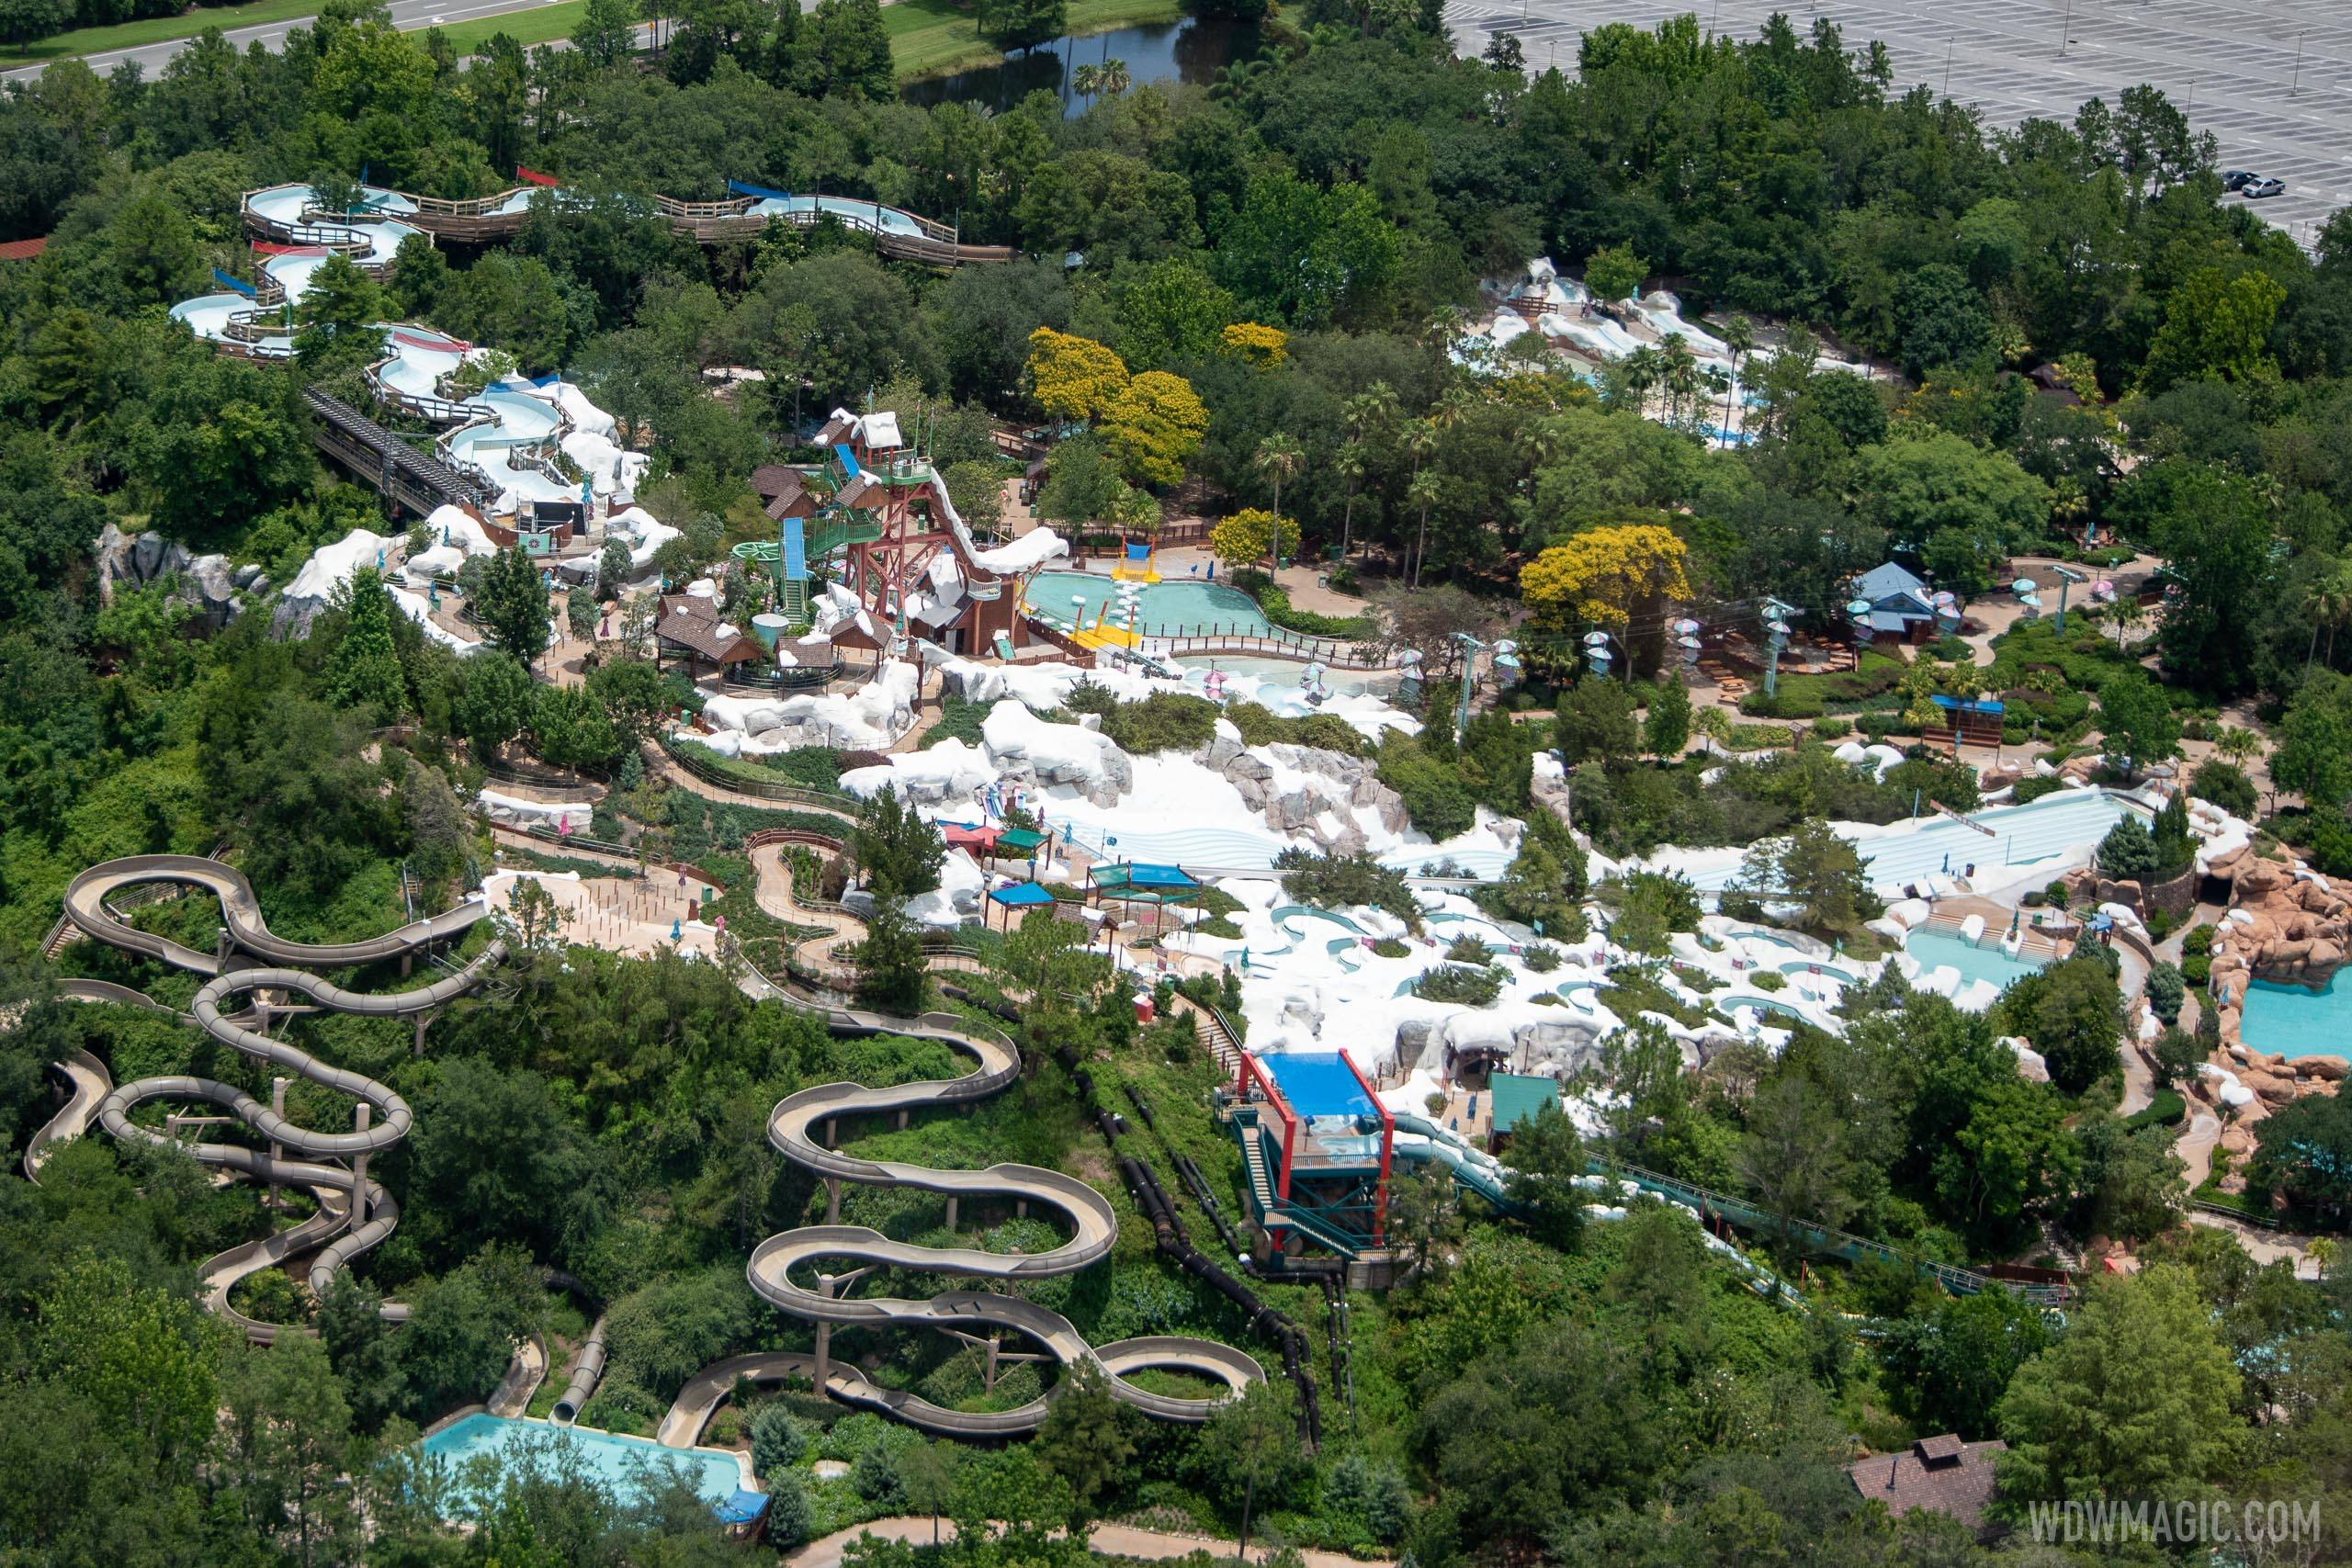 Blizzard Beach will be closed for 3 days this week